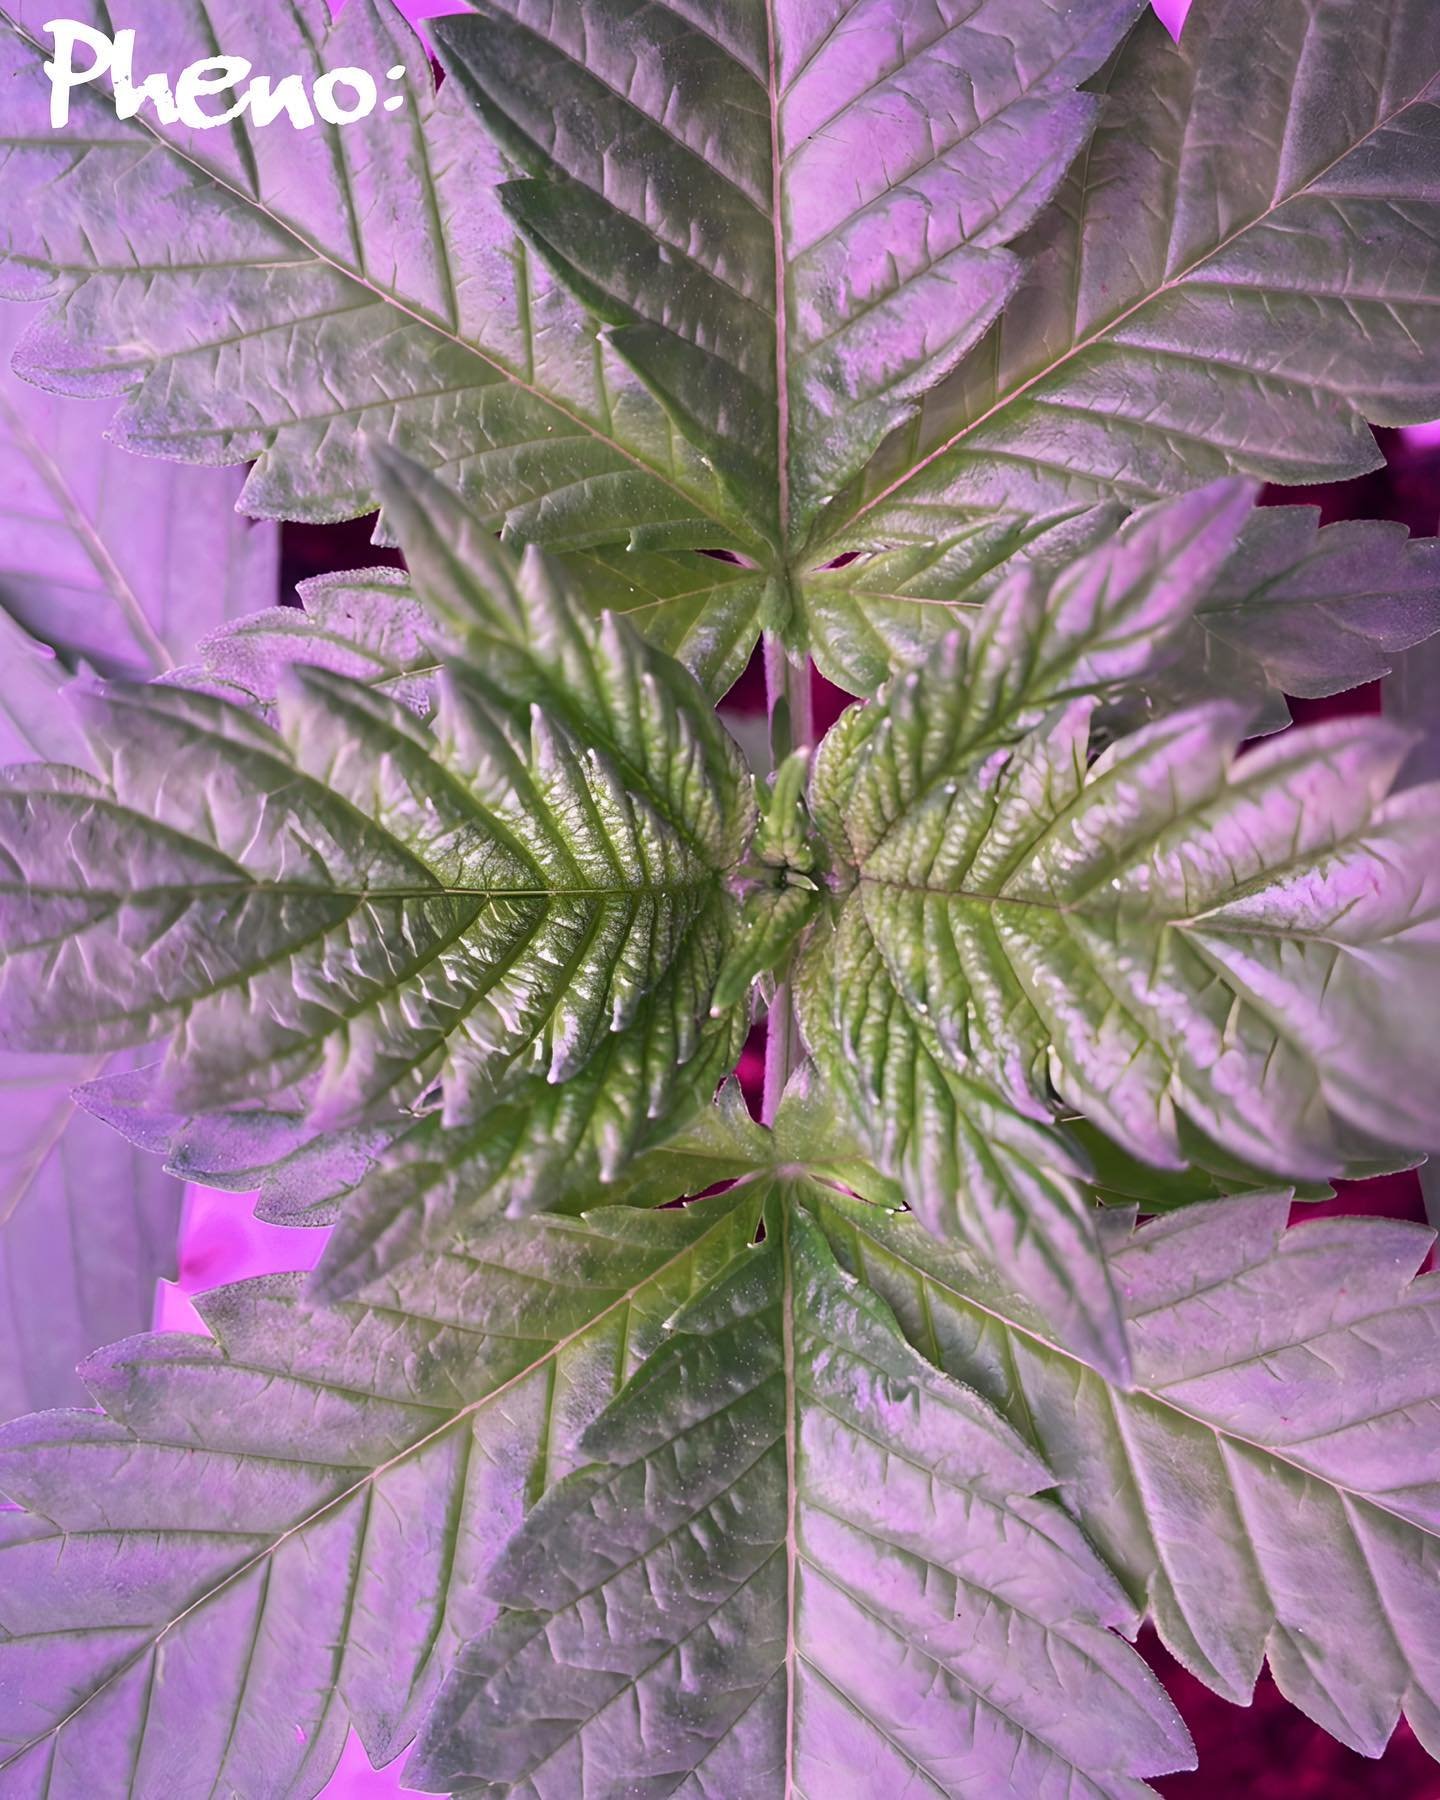 🌿✨New phenos:  love watching the thick indica leaves on this girl emerge - a living fractal.

#myndset  #cultivatingconsciousness #420 #sustainability#puremichigan  #craftcannabis #cannabis #pheno